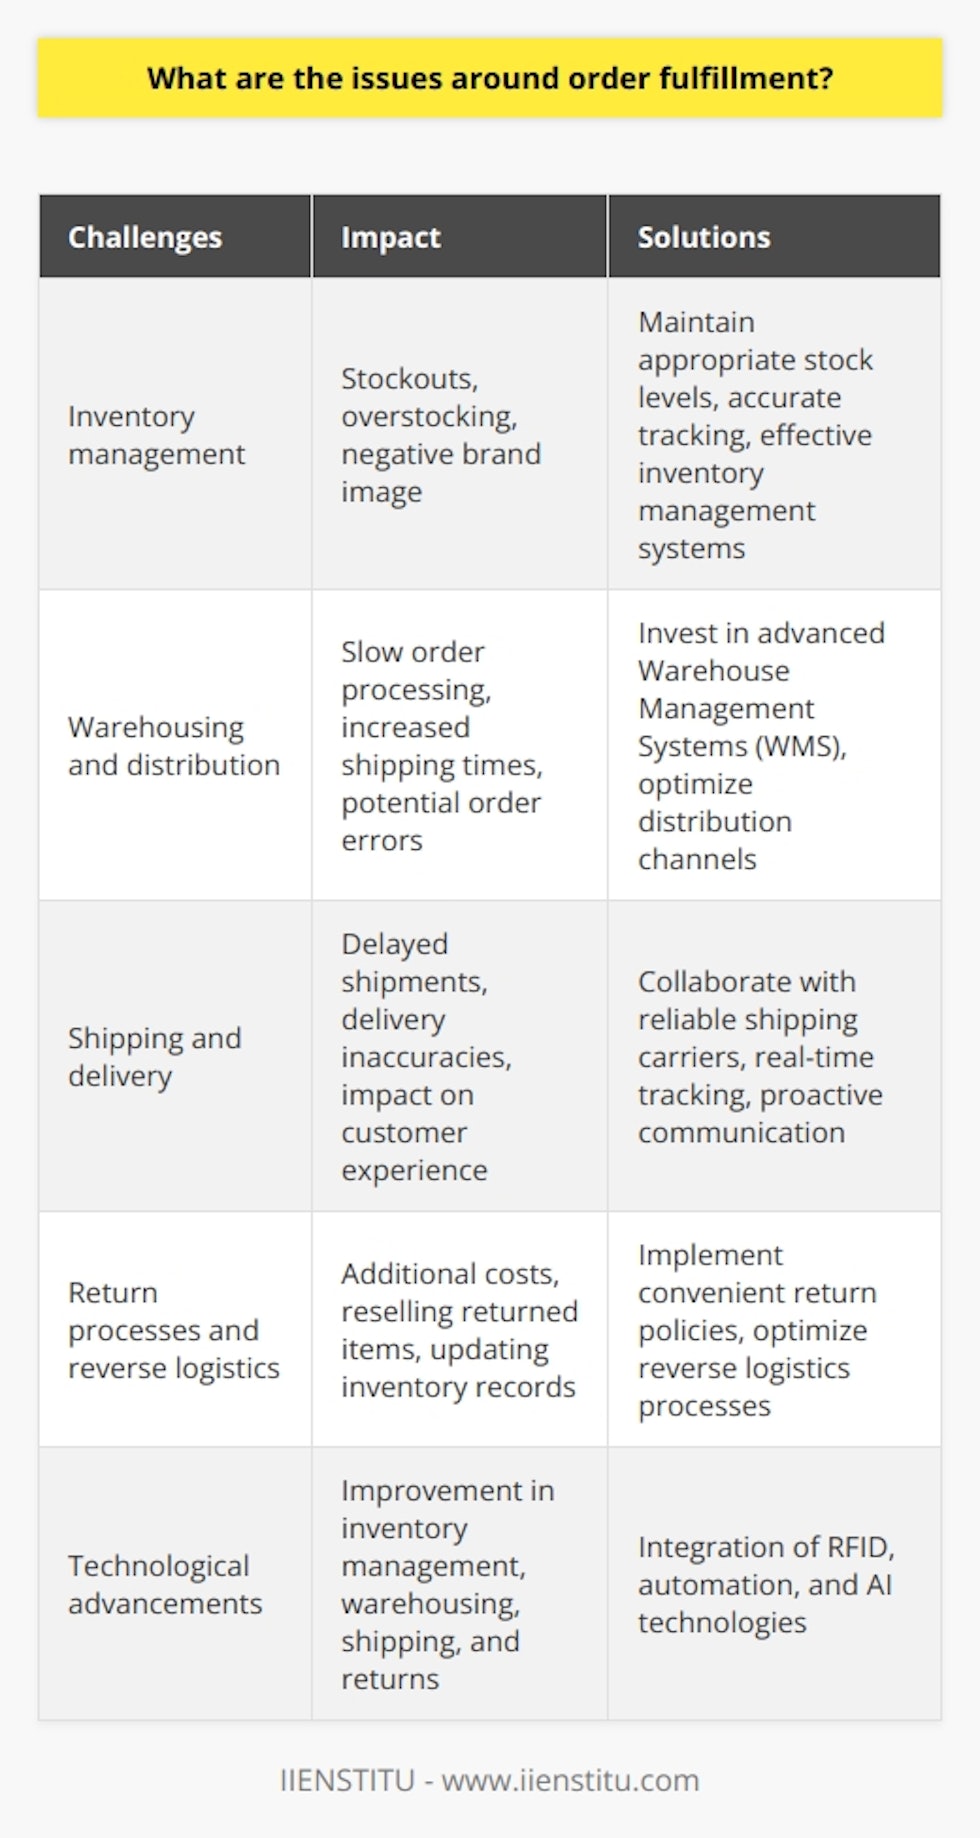 Order fulfillment is a critical aspect of the e-commerce industry, as it directly impacts customer satisfaction and brand reputation. There are several challenges that arise in the process of order fulfillment, which require careful attention from retailers and service providers.Inventory management is one of the major challenges faced in order fulfillment. It is essential to maintain appropriate stock levels and accurately track products to avoid delays or cancellations of customer orders. The failure to maintain effective inventory management can result in stockouts and overstocking, which can negatively affect customer satisfaction and brand image.Efficient warehousing and distribution are also crucial for timely order fulfillment. Inadequate storage space, poor organization, and a lack of robust management systems can lead to slow order processing, increased shipping times, and potential order errors. Investing in advanced Warehouse Management Systems (WMS) and optimizing distribution channels can help address these challenges.Shipping and delivery are critical components of order fulfillment. Issues such as delayed shipments, carrier capacity constraints, and delivery inaccuracies greatly impact the customer experience. It is important for retailers to collaborate with reliable shipping carriers, track deliveries in real-time, and offer proactive communication to resolve such issues.The rising trend of online shopping has also increased the demand for seamless return processes. Managing returns and reverse logistics often pose logistical challenges, such as additional costs, reselling returned items, and updating inventory records. Implementing convenient return policies and optimizing reverse logistics processes can improve customer satisfaction and streamline order fulfillment.E-commerce businesses must embrace technological advancements to enhance their order fulfillment processes. Integration of various technologies like Radio Frequency Identification (RFID), automation, and Artificial Intelligence (AI) can help resolve issues around inventory management, warehousing, shipping, and returns.In conclusion, addressing the various challenges surrounding order fulfillment is crucial for e-commerce businesses to maintain customer satisfaction and sustain success in the highly competitive online marketplace. By investing in advanced technologies, optimizing warehousing and distribution, and streamlining returns management, businesses can improve overall order fulfillment efficiency and ultimately enhance their online reputation.